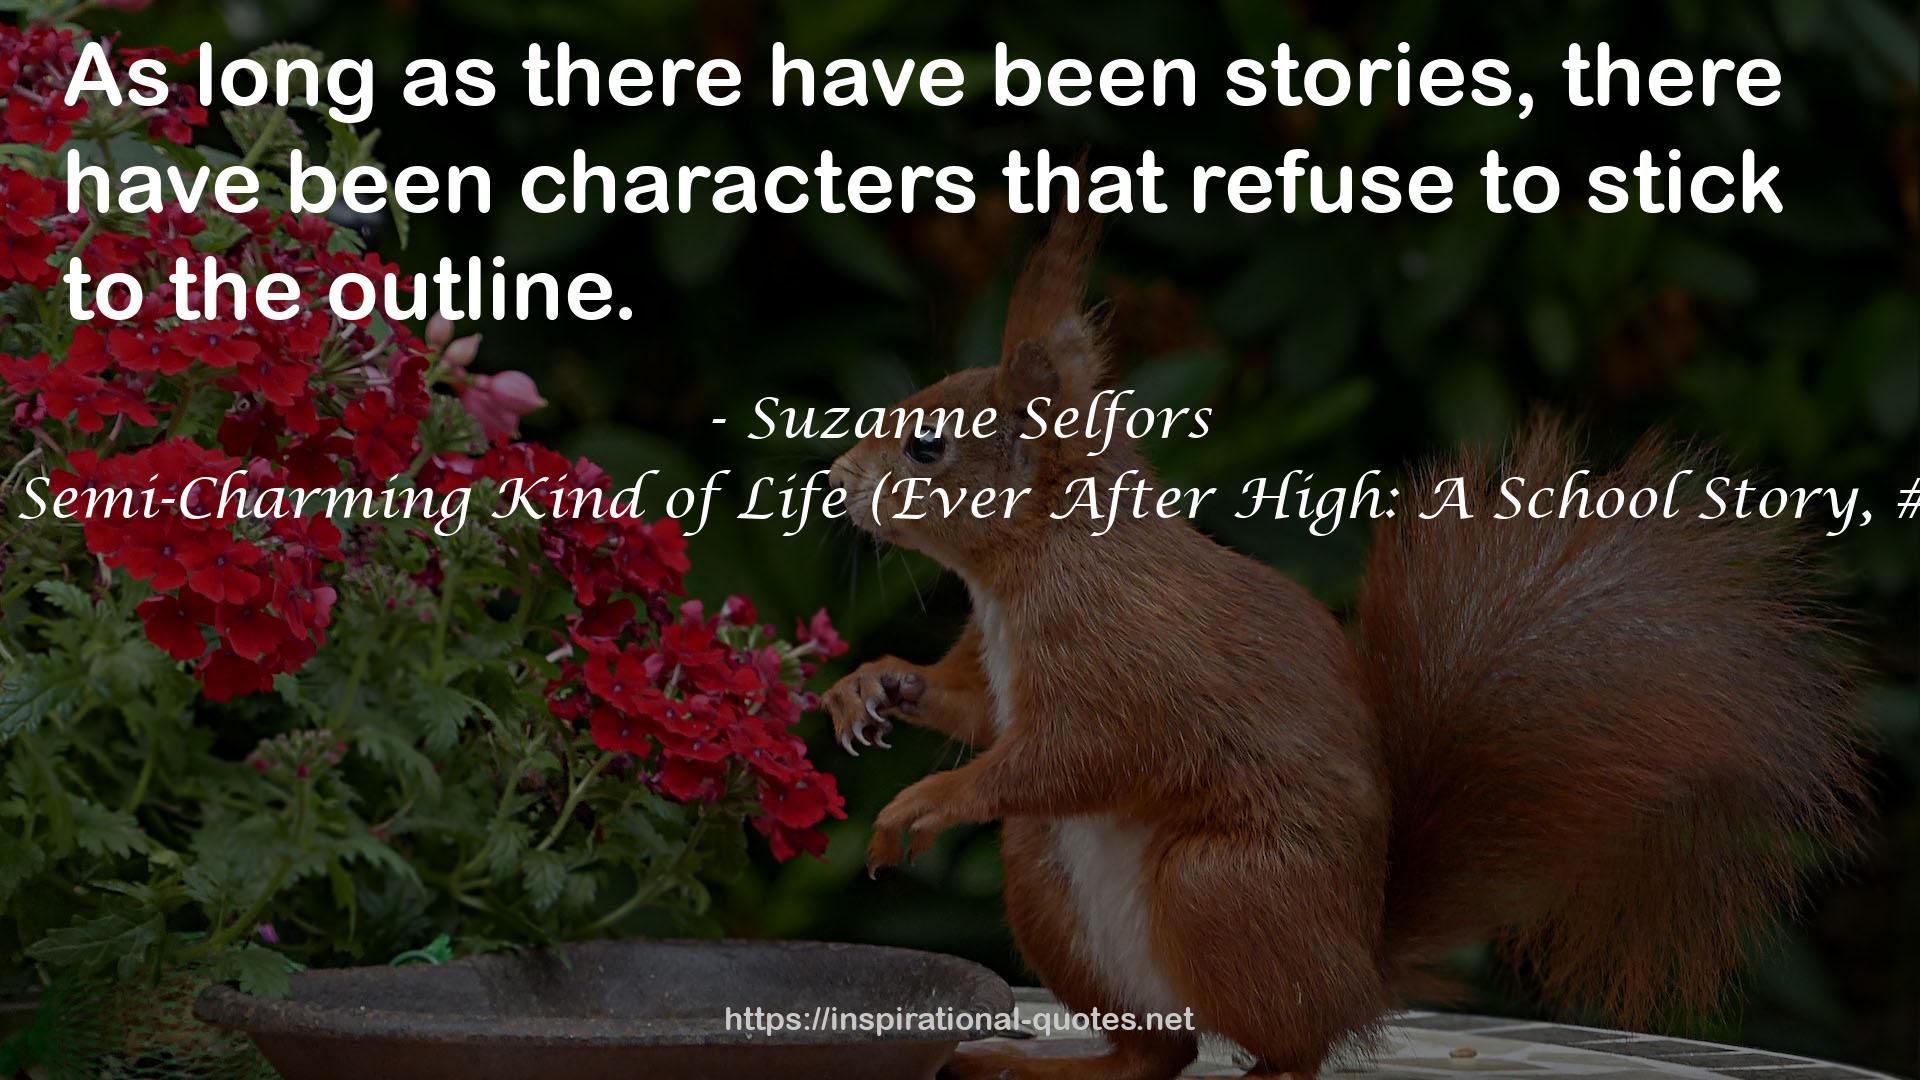 A Semi-Charming Kind of Life (Ever After High: A School Story, #3) QUOTES